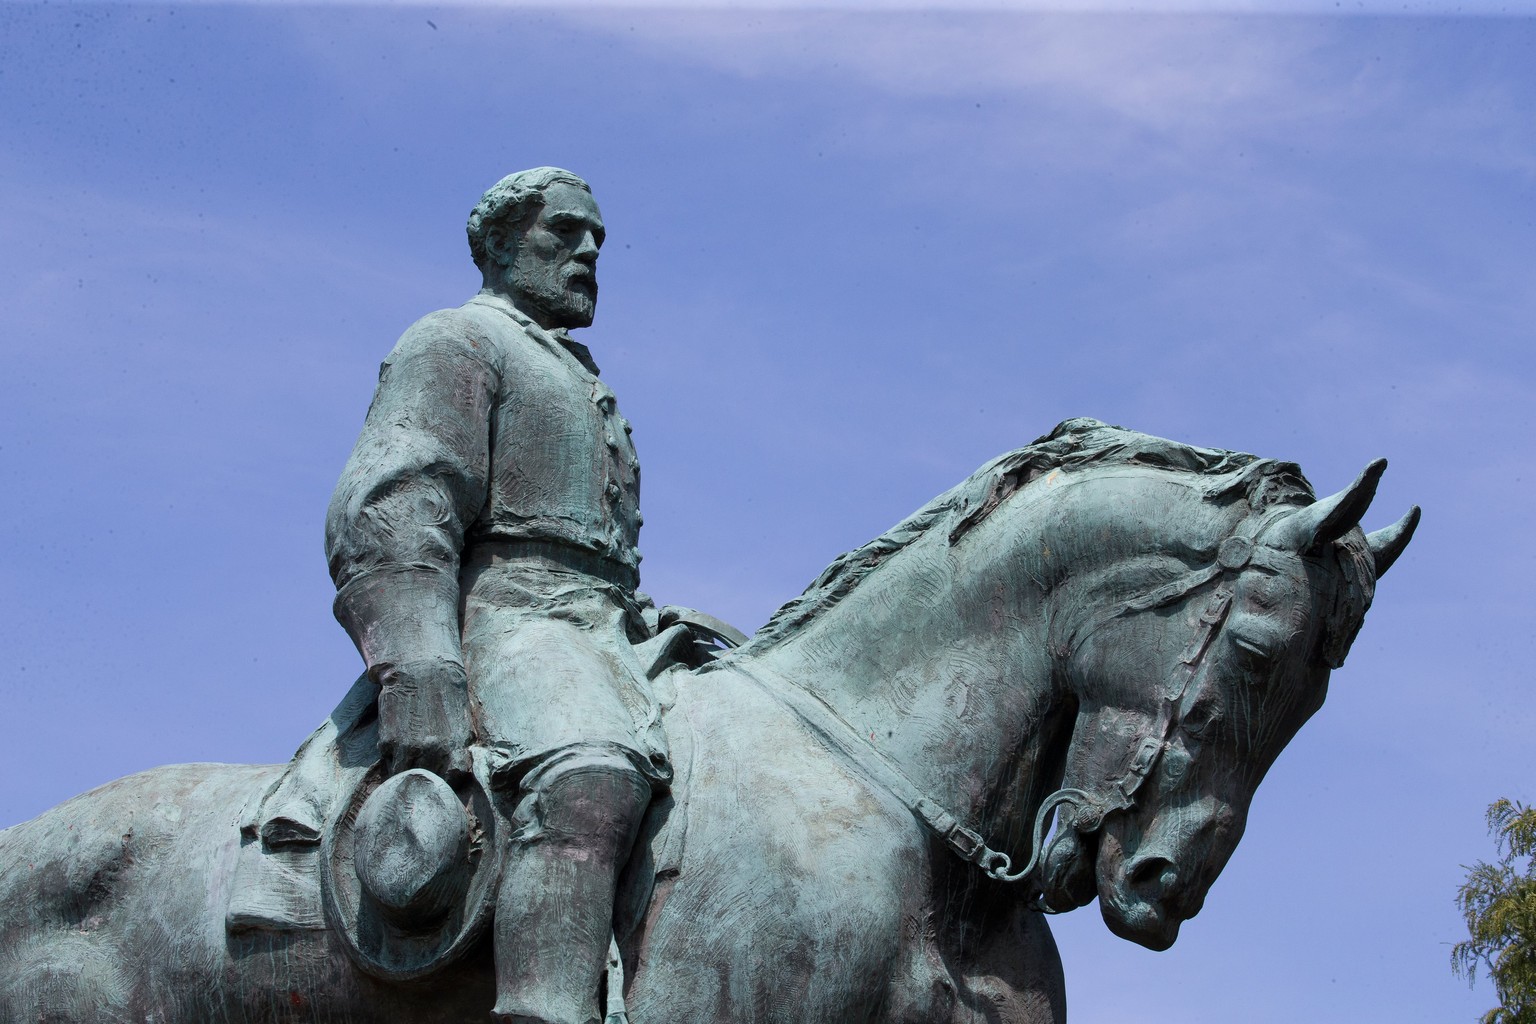 epa06142736 The Robert E Lee statue for which the &#039;Unite the Right&#039; rally was organized to protest its removal in Charlottesville, Virginia, USA, 13 August 2017. According to media reports a ...